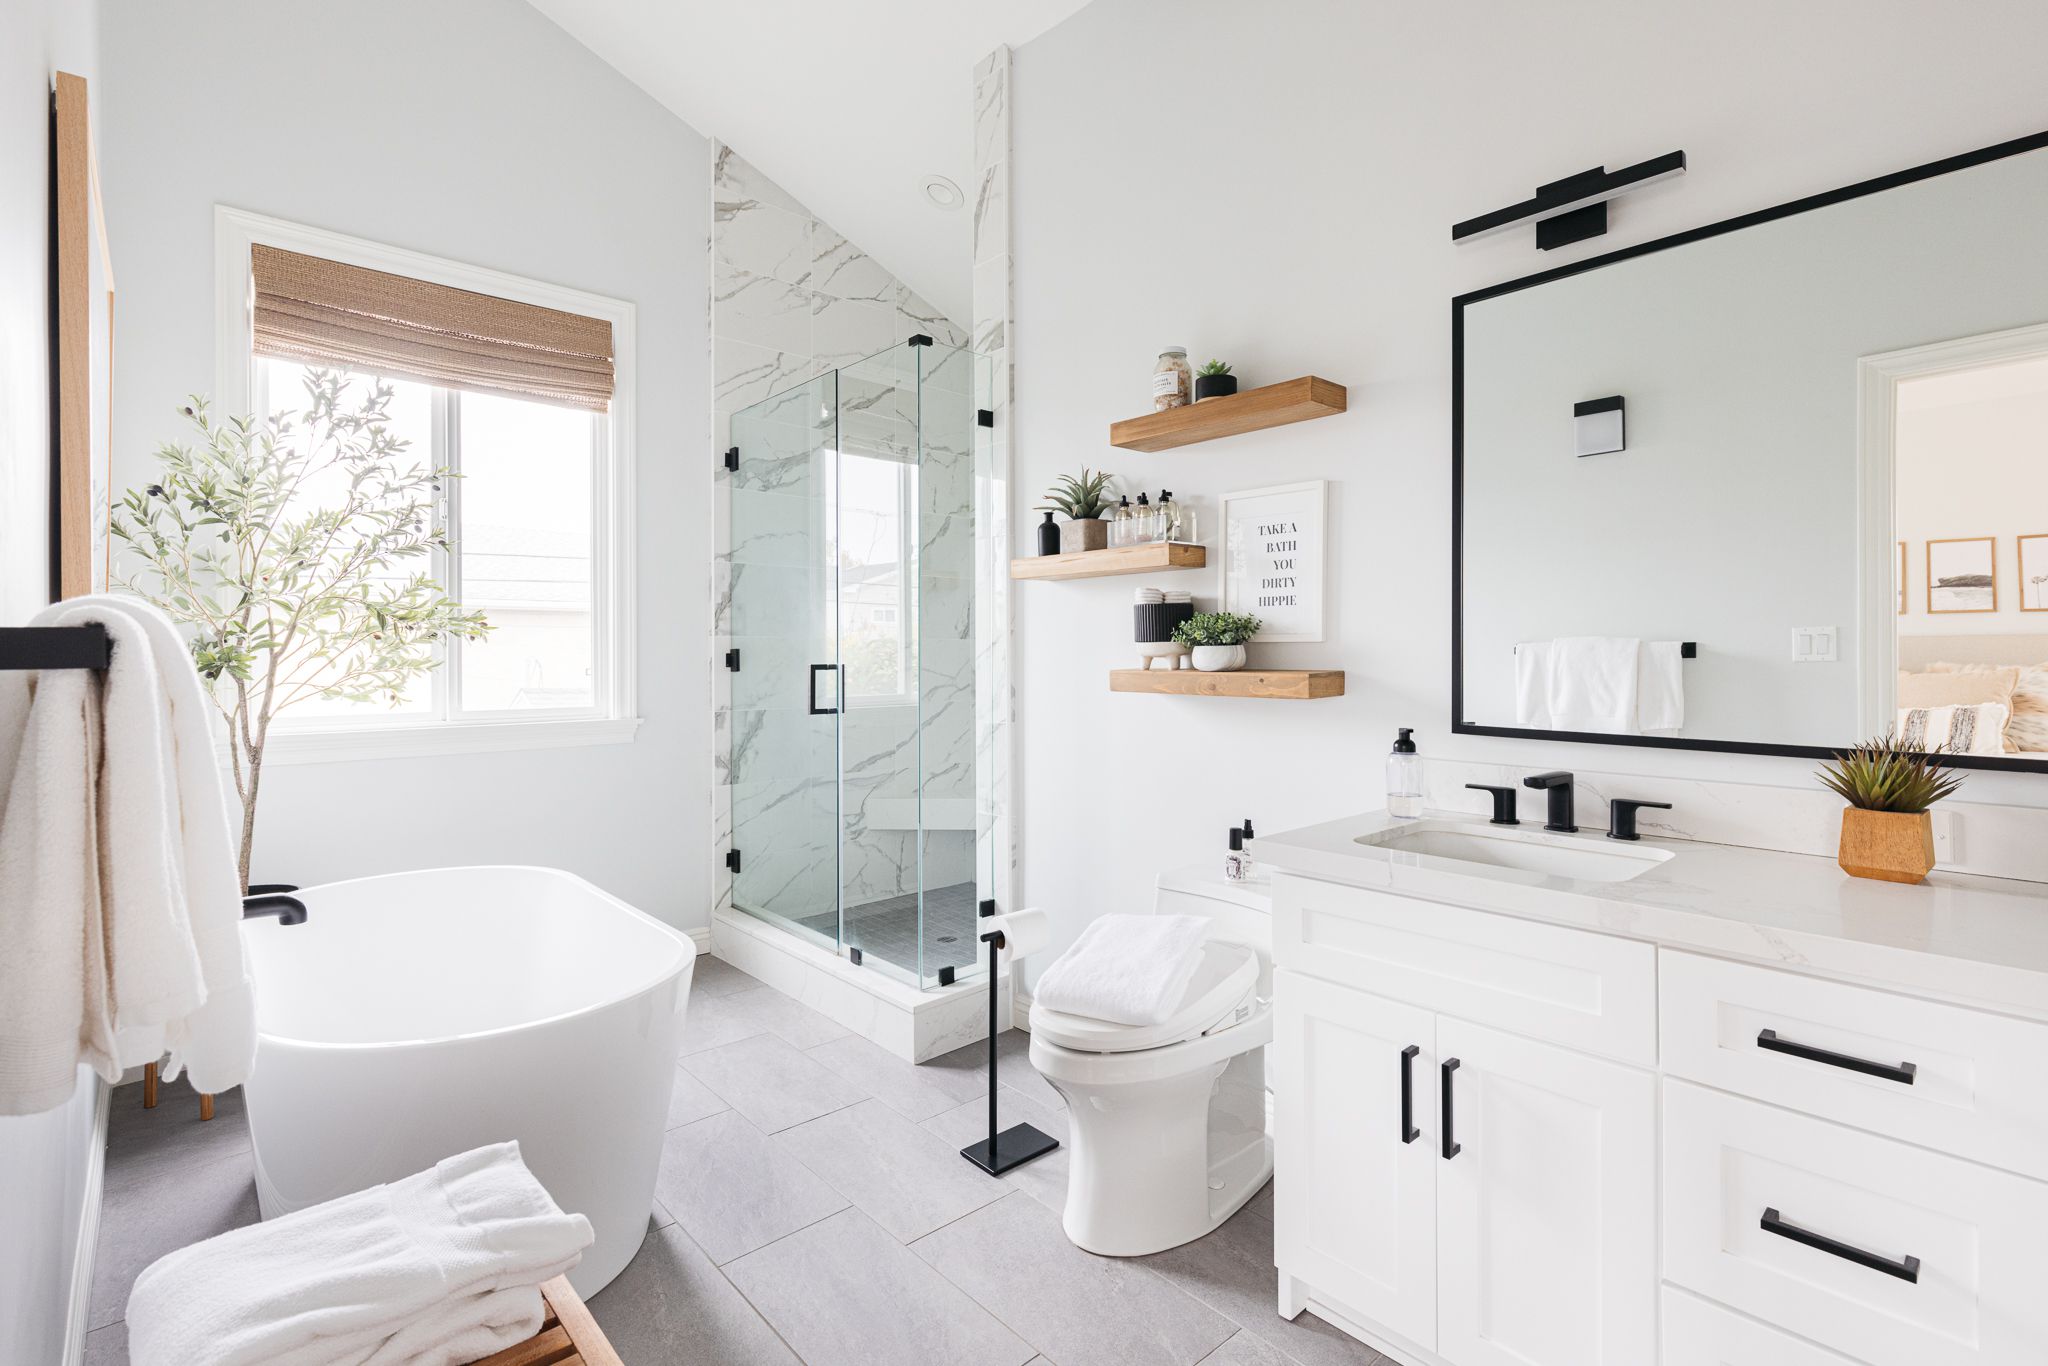 Top Bathroom Remodeling Ideas to Sell Your Home